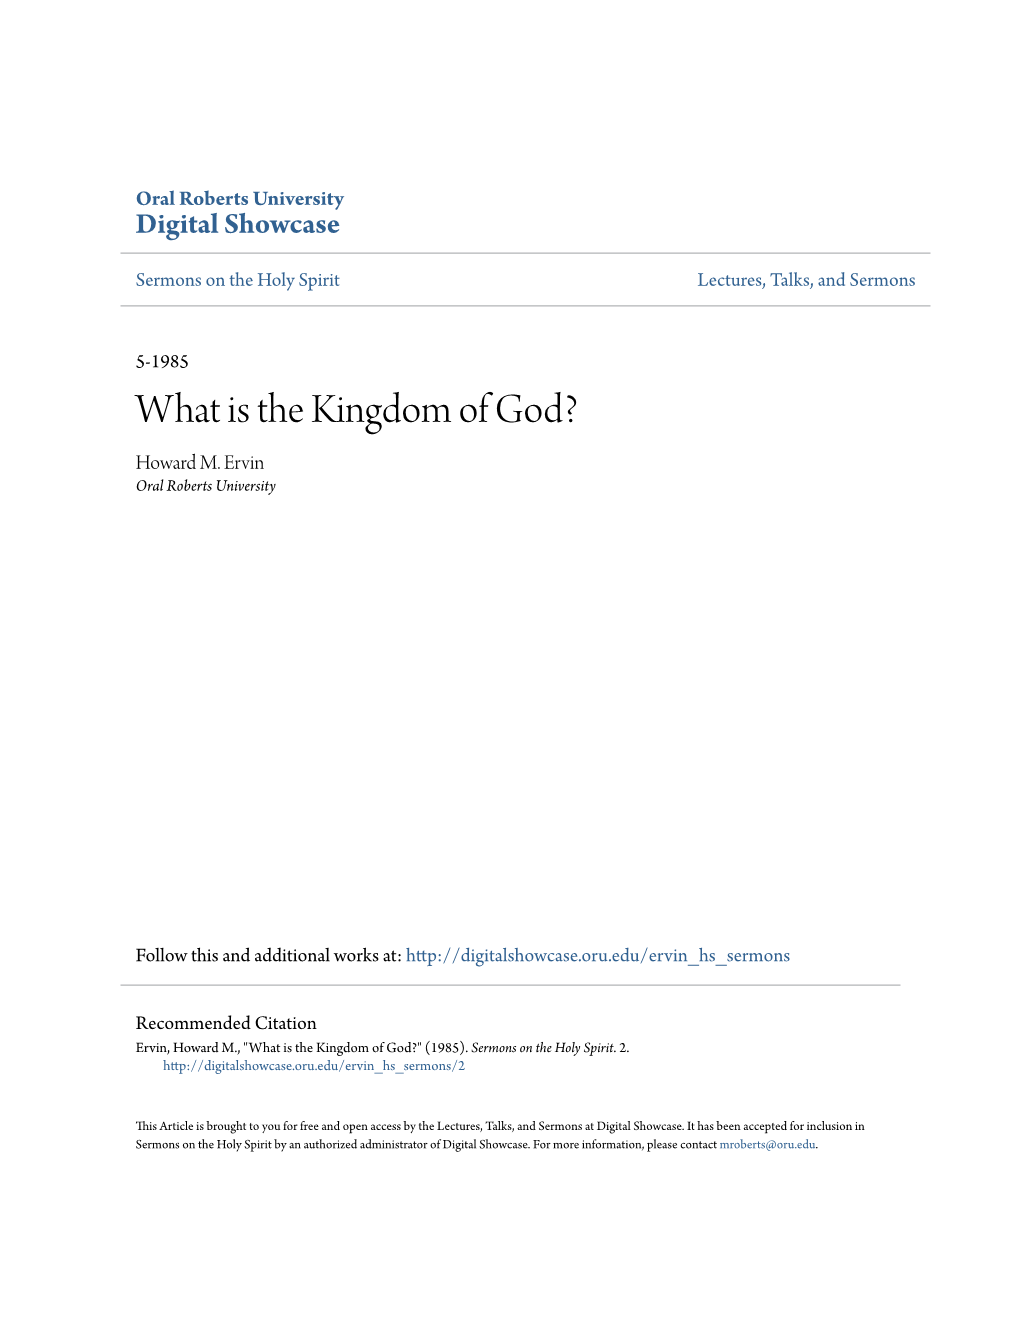 What Is the Kingdom of God? Howard M